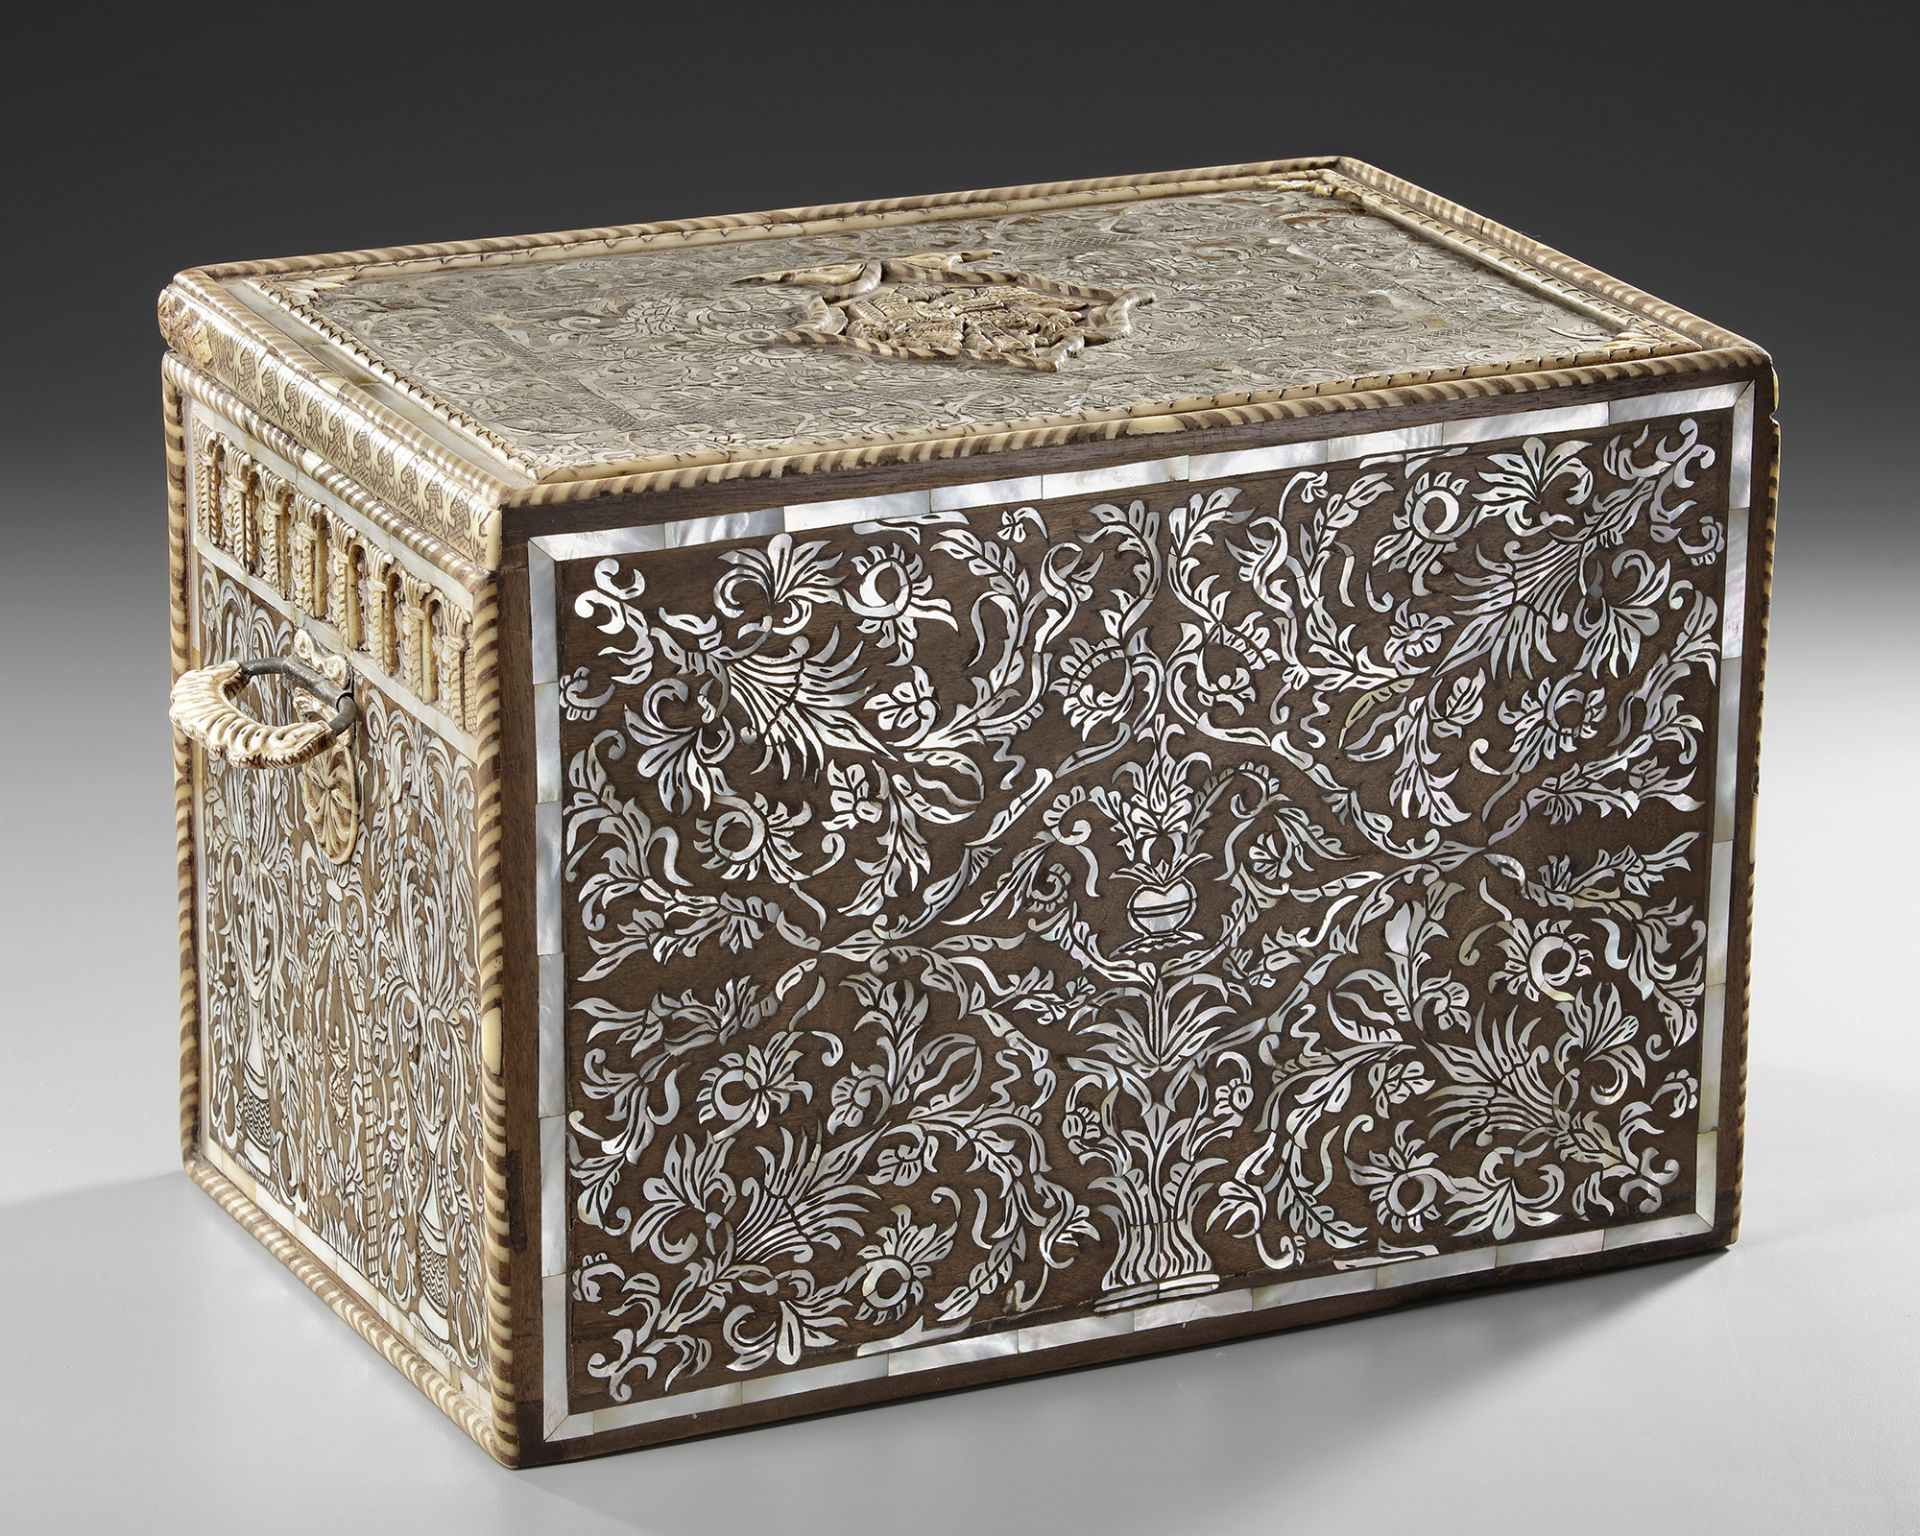 AN OTTOMAN MOTHER-OF-PEARL AND BONE INLAID CABINET, TURKEY OR SYRIA, 18TH-19TH CENTURY - Bild 5 aus 6